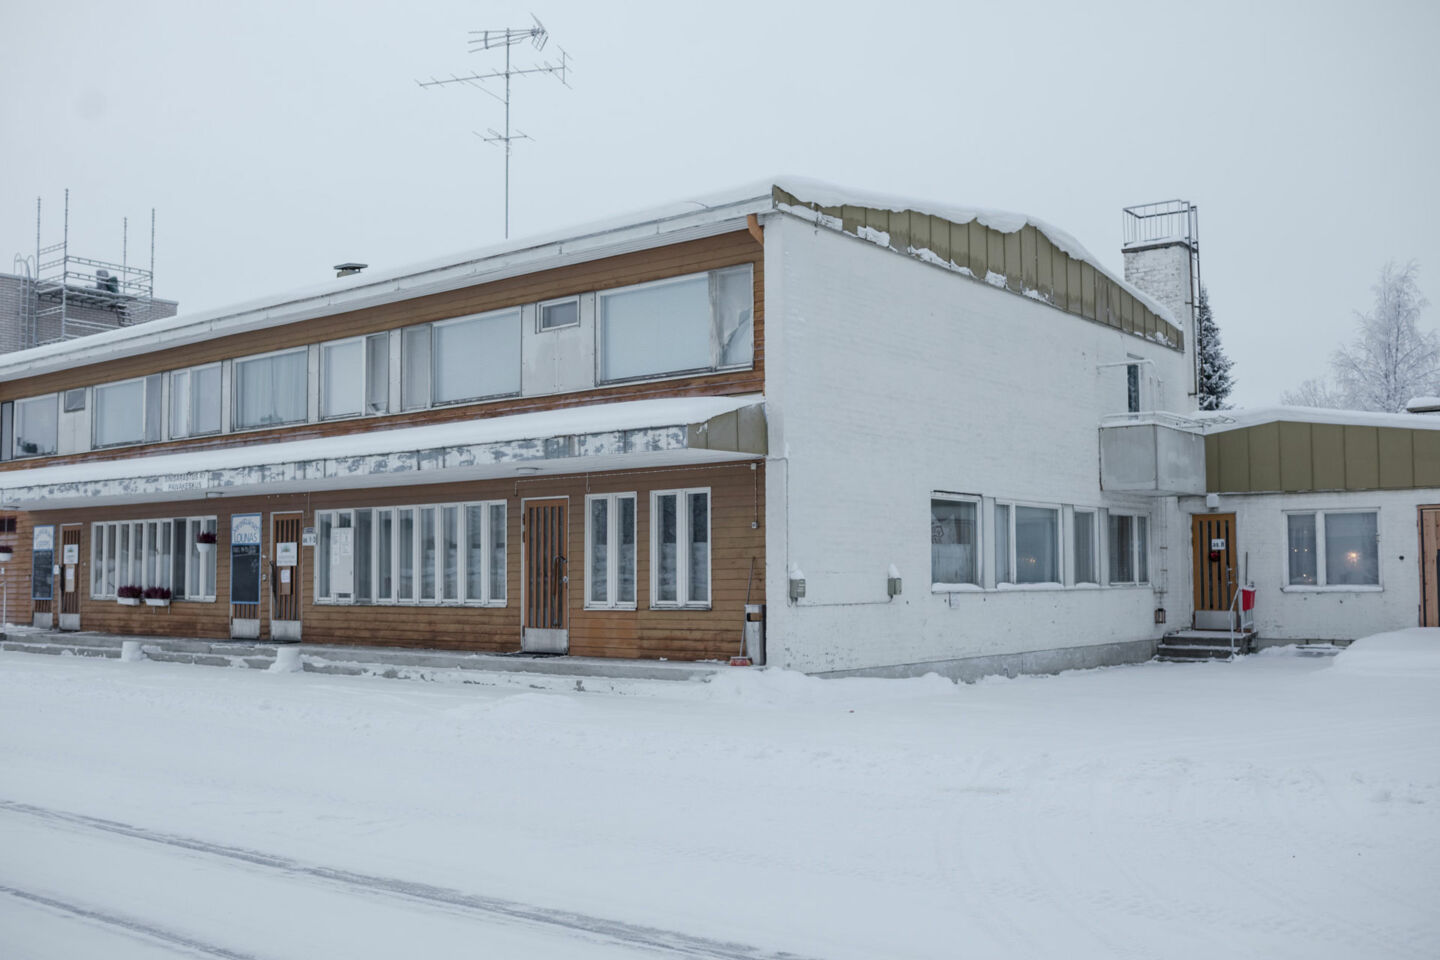 Old building in winter in the retro town of Sodankylä, a filming location in Finnish Lapland